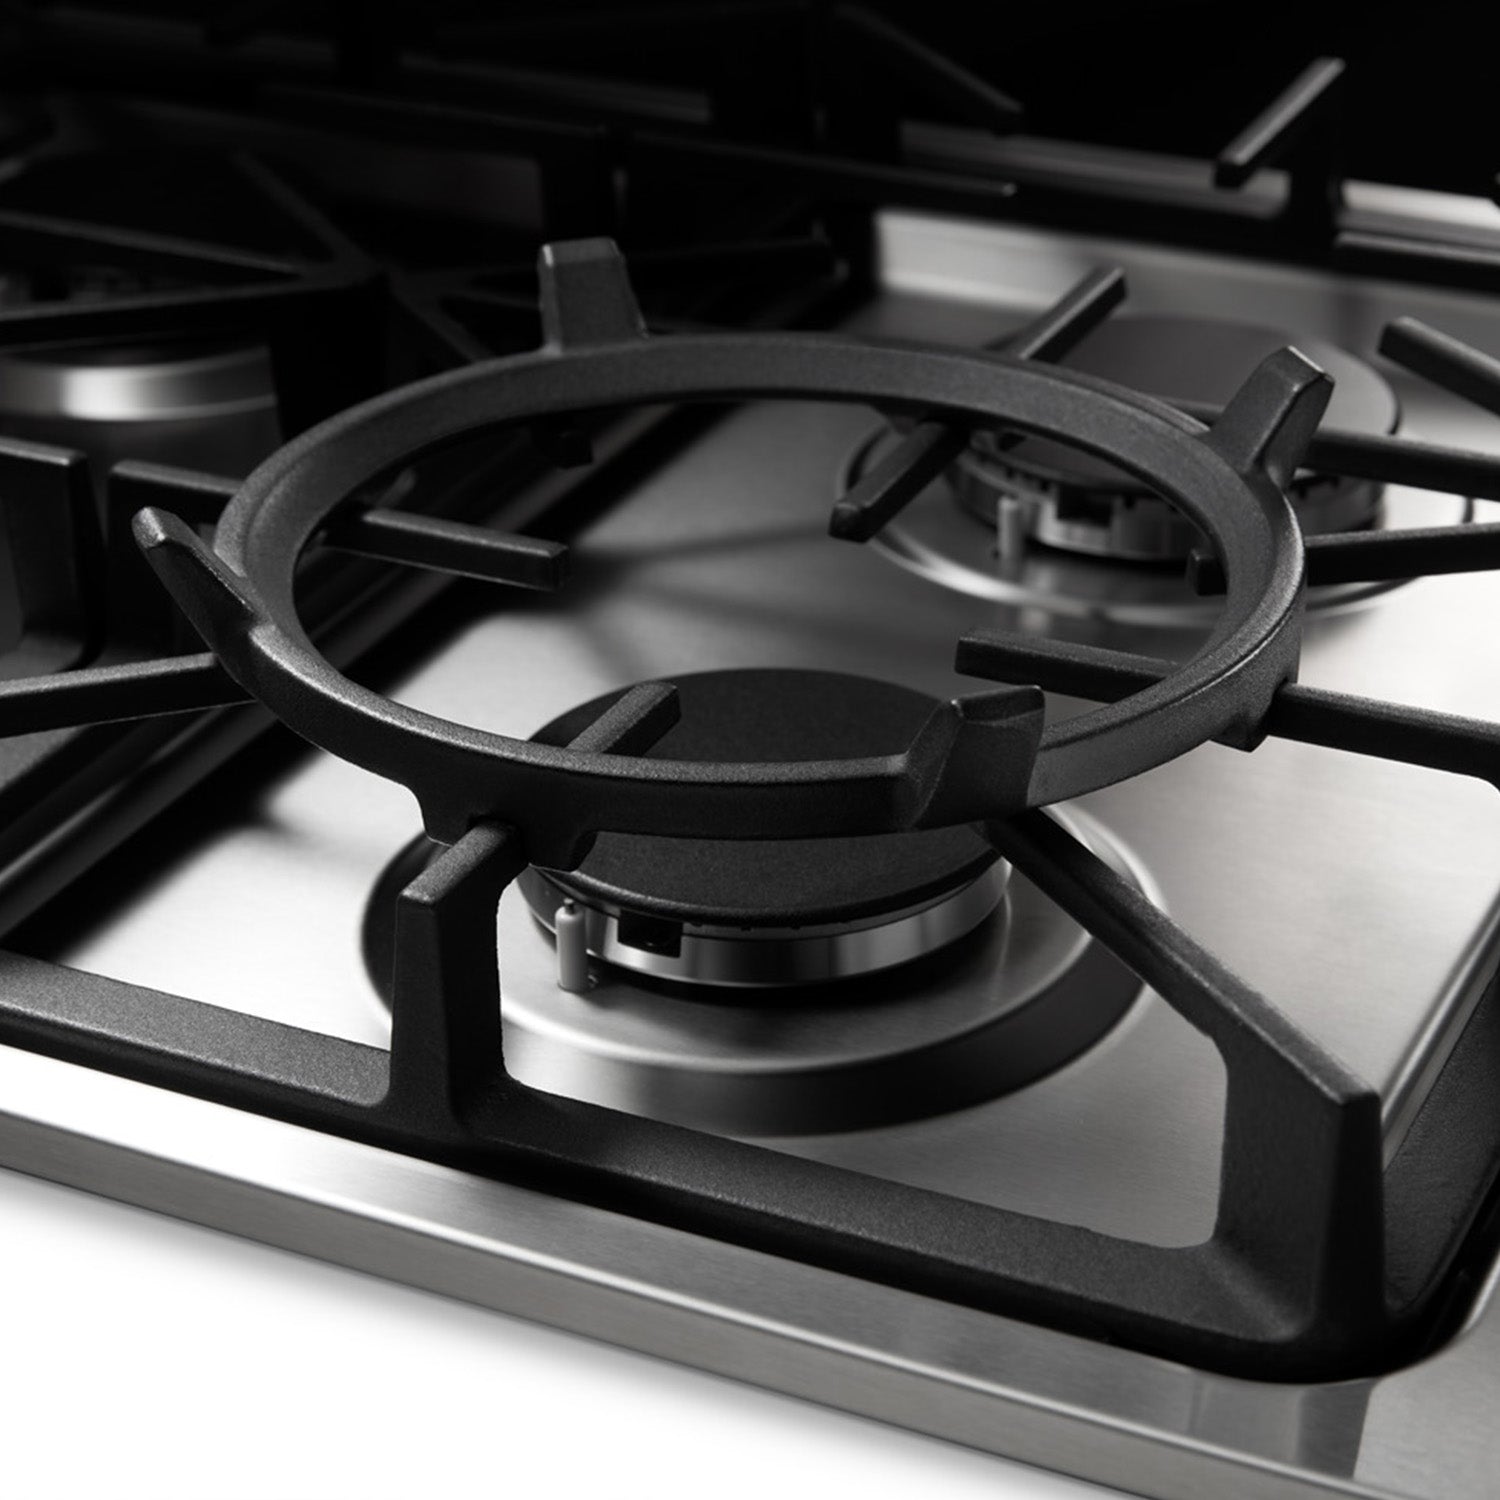 Thor Kitchen 36 Inch Professional Drop-In Gas Cooktop with Six Burners in Stainless Steel - TGC3601